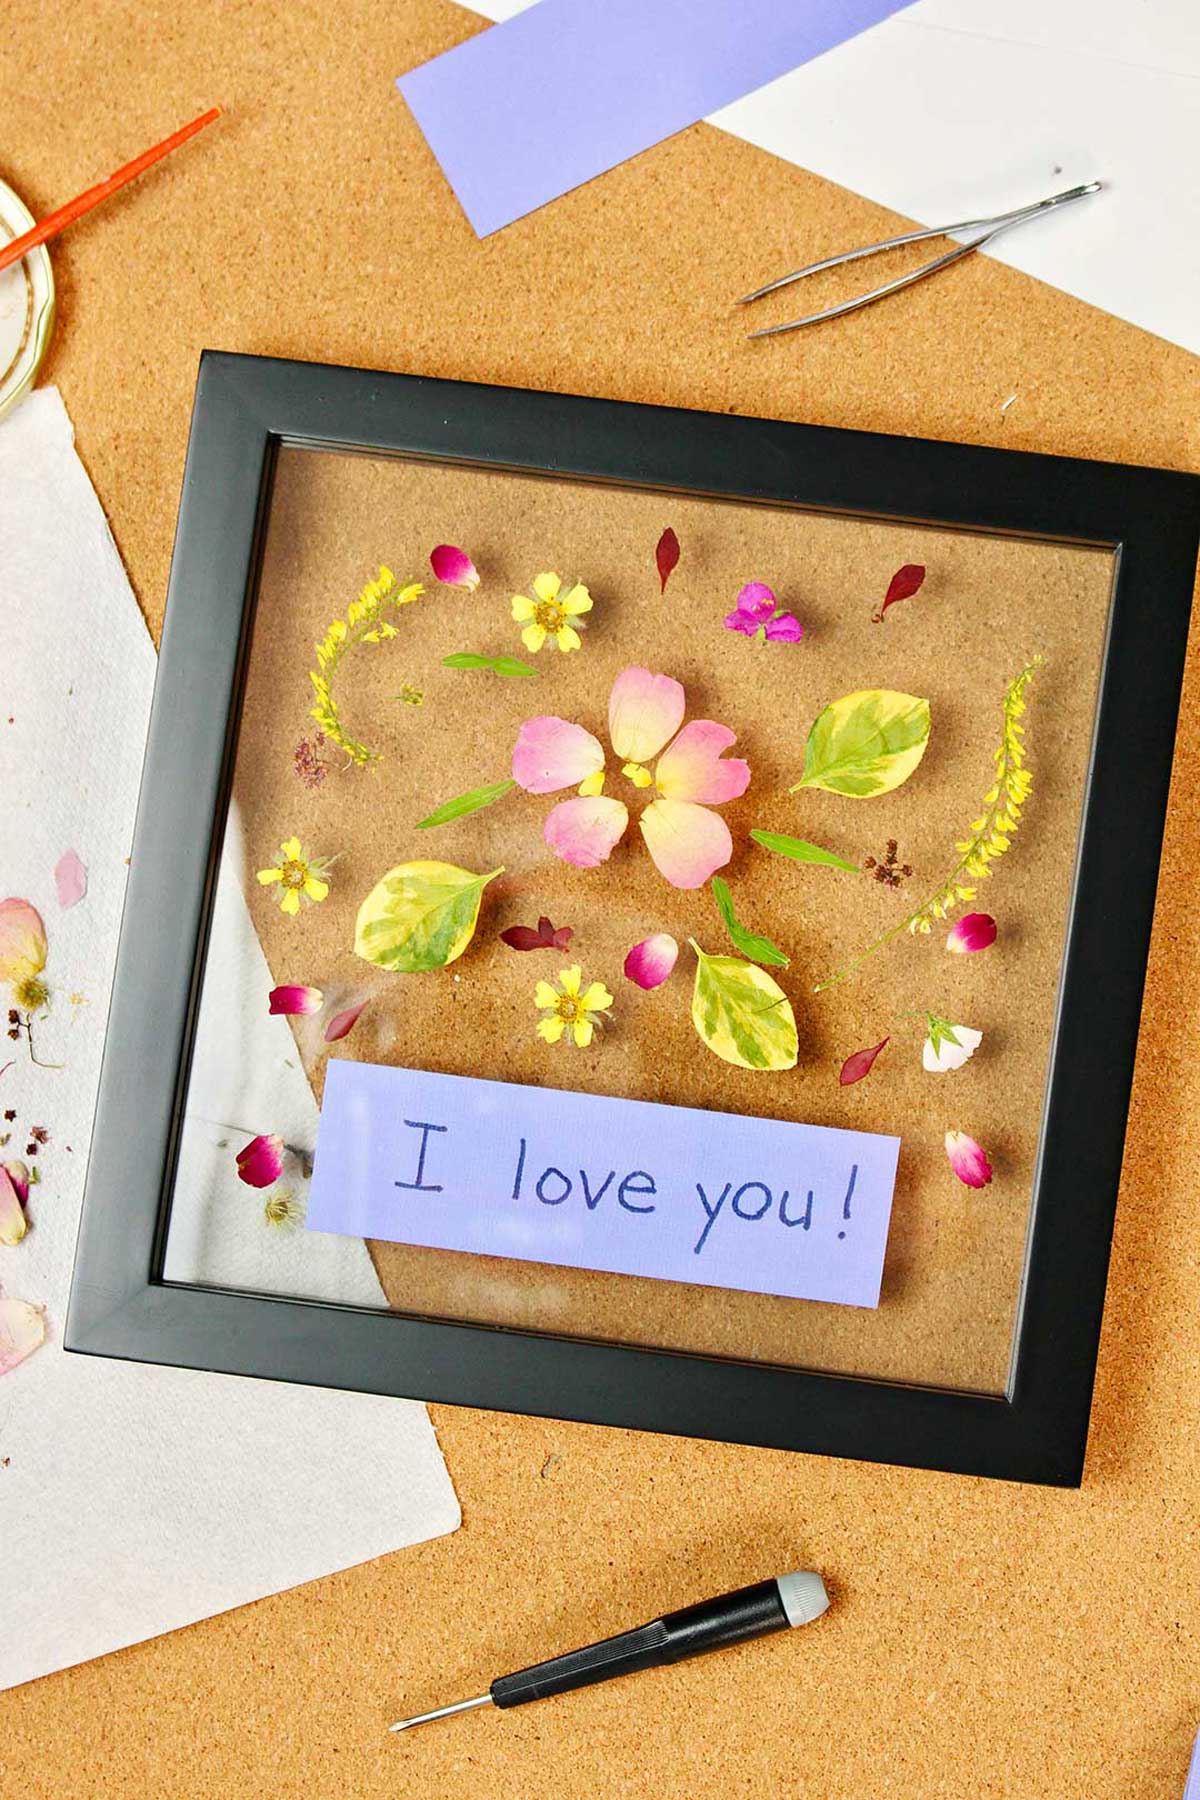 Framed pressed flowers with a purple tag inside saying "I love you!"